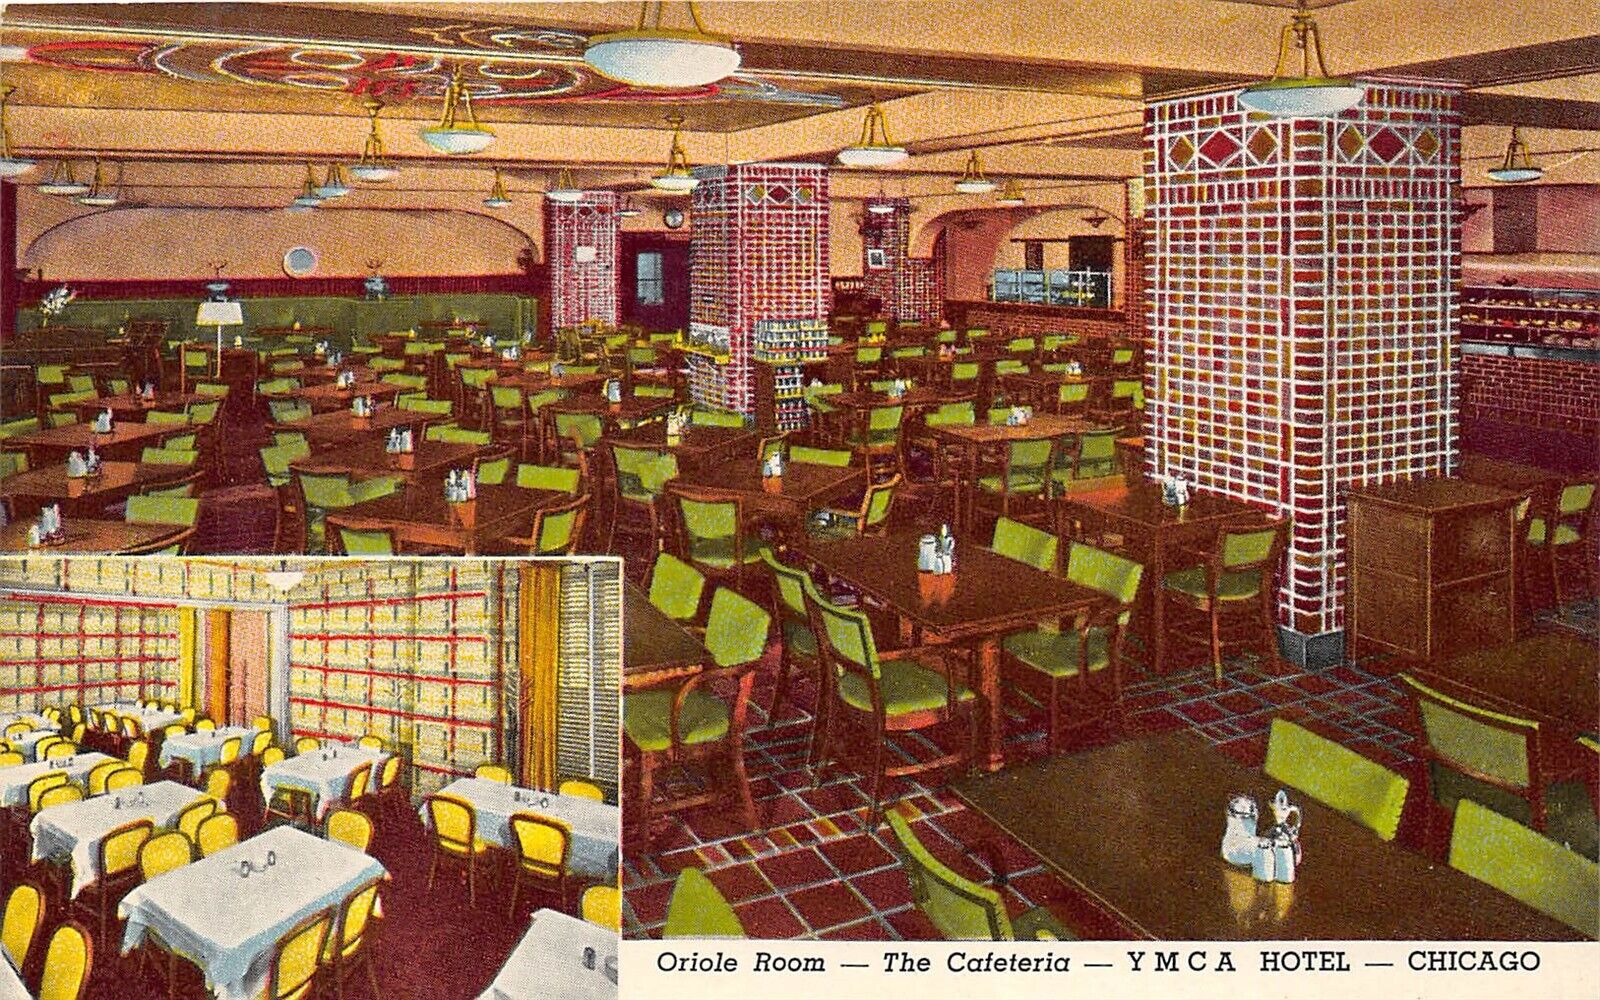 Chicago Illinois 1950s Postcard Oriole Room The Cafeteria YMCA Hotel 